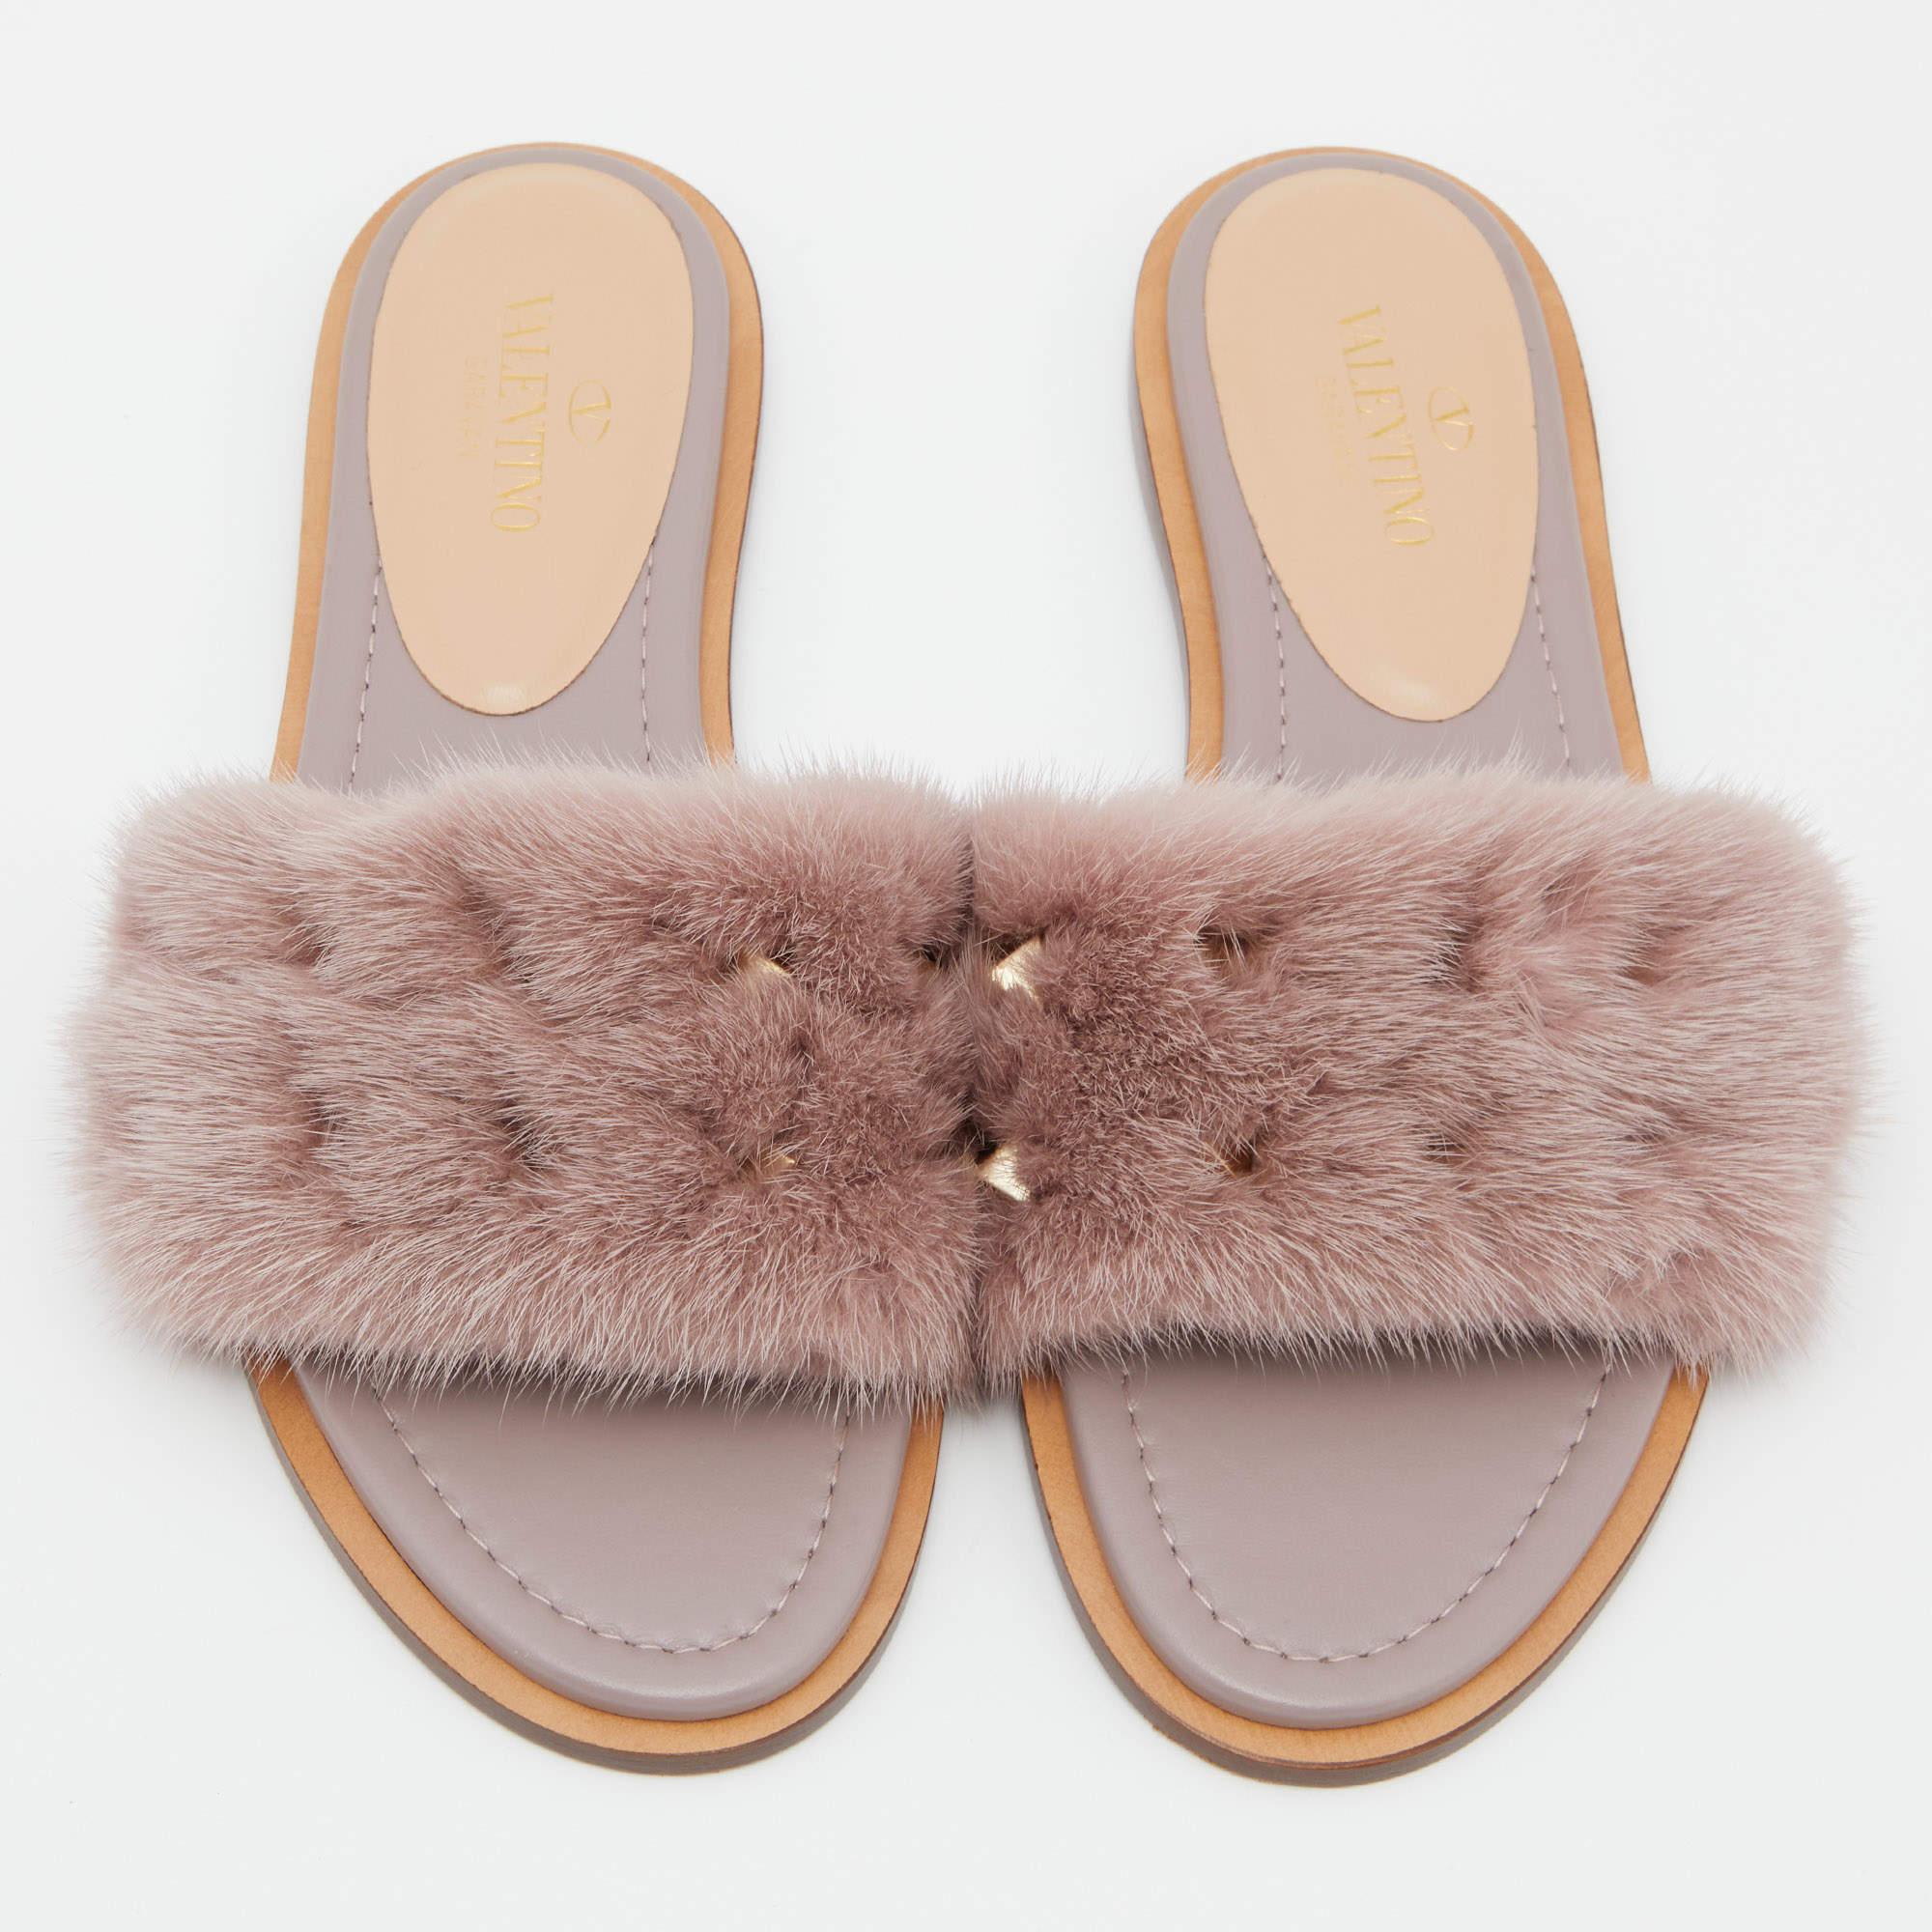 Comfort and fashion come together to bring forth these fabulous flat slides from Valentino. The multicolor slides feature fur straps detailed with the signature Rockstud studs and comfortable leather insoles. Happy feet, we say!

